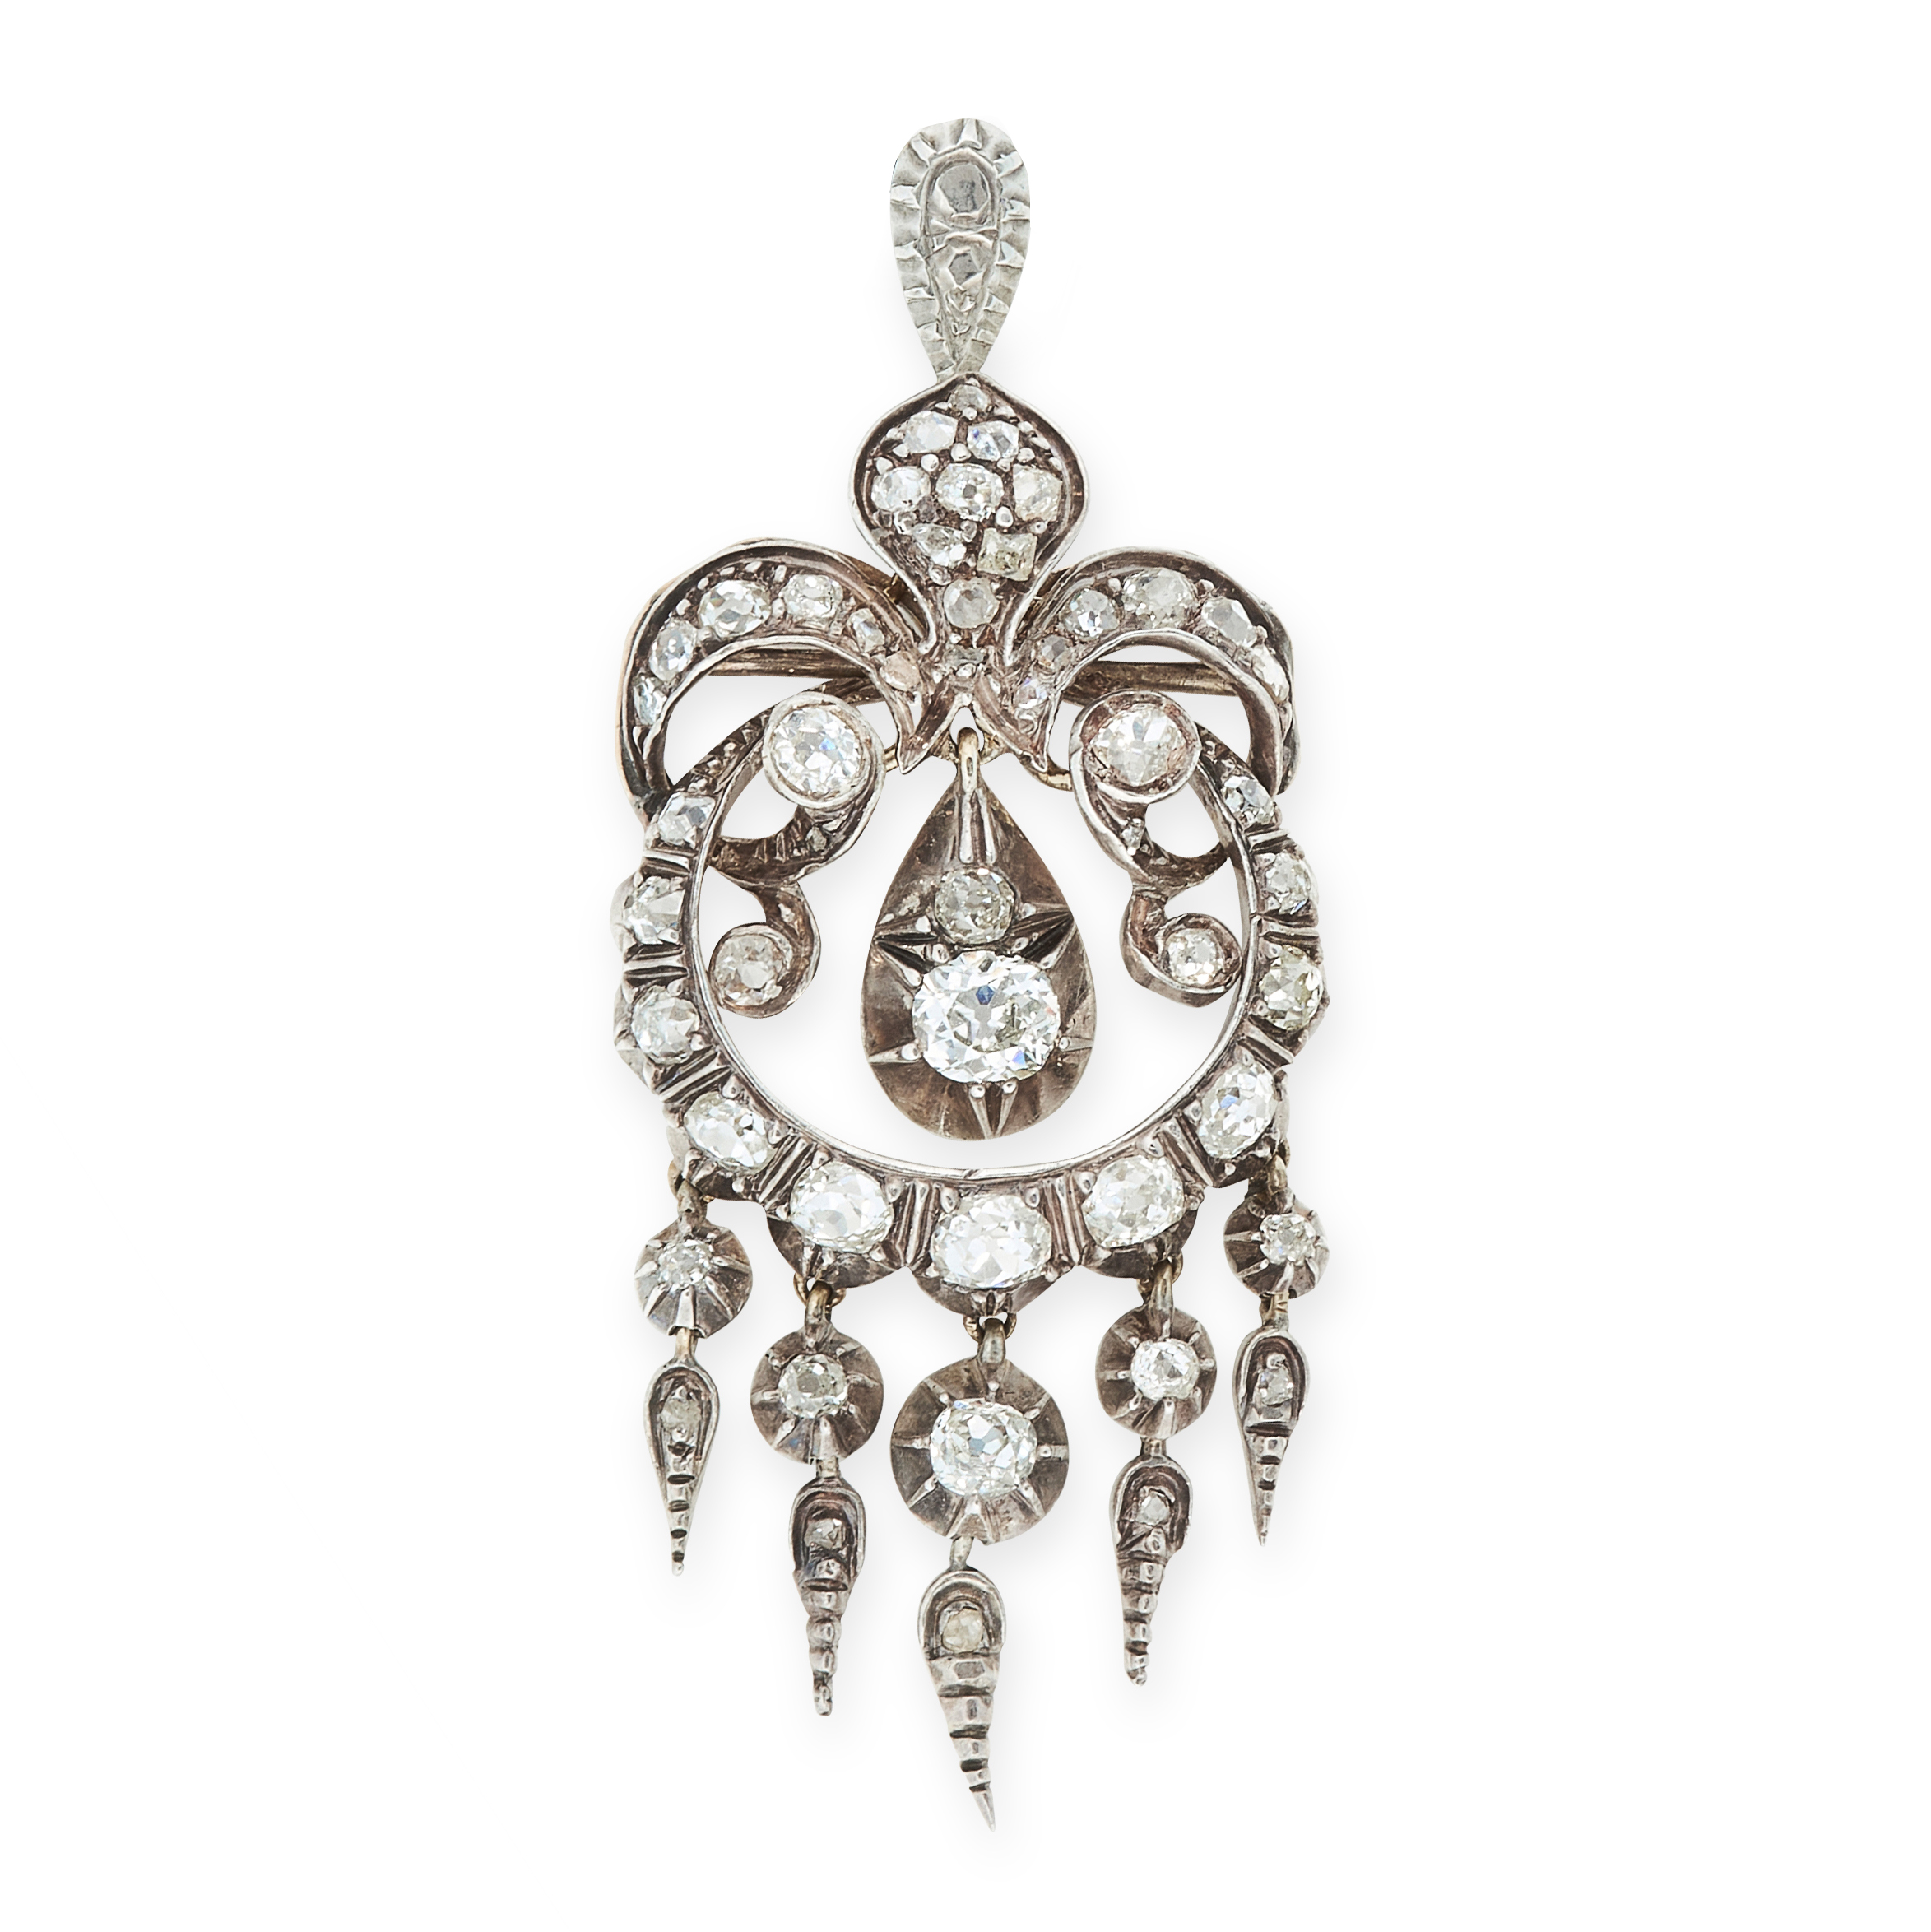 AN ANTIQUE DIAMOND PENDANT, 19TH CENTURY in yellow gold and silver, the scrolling circular body